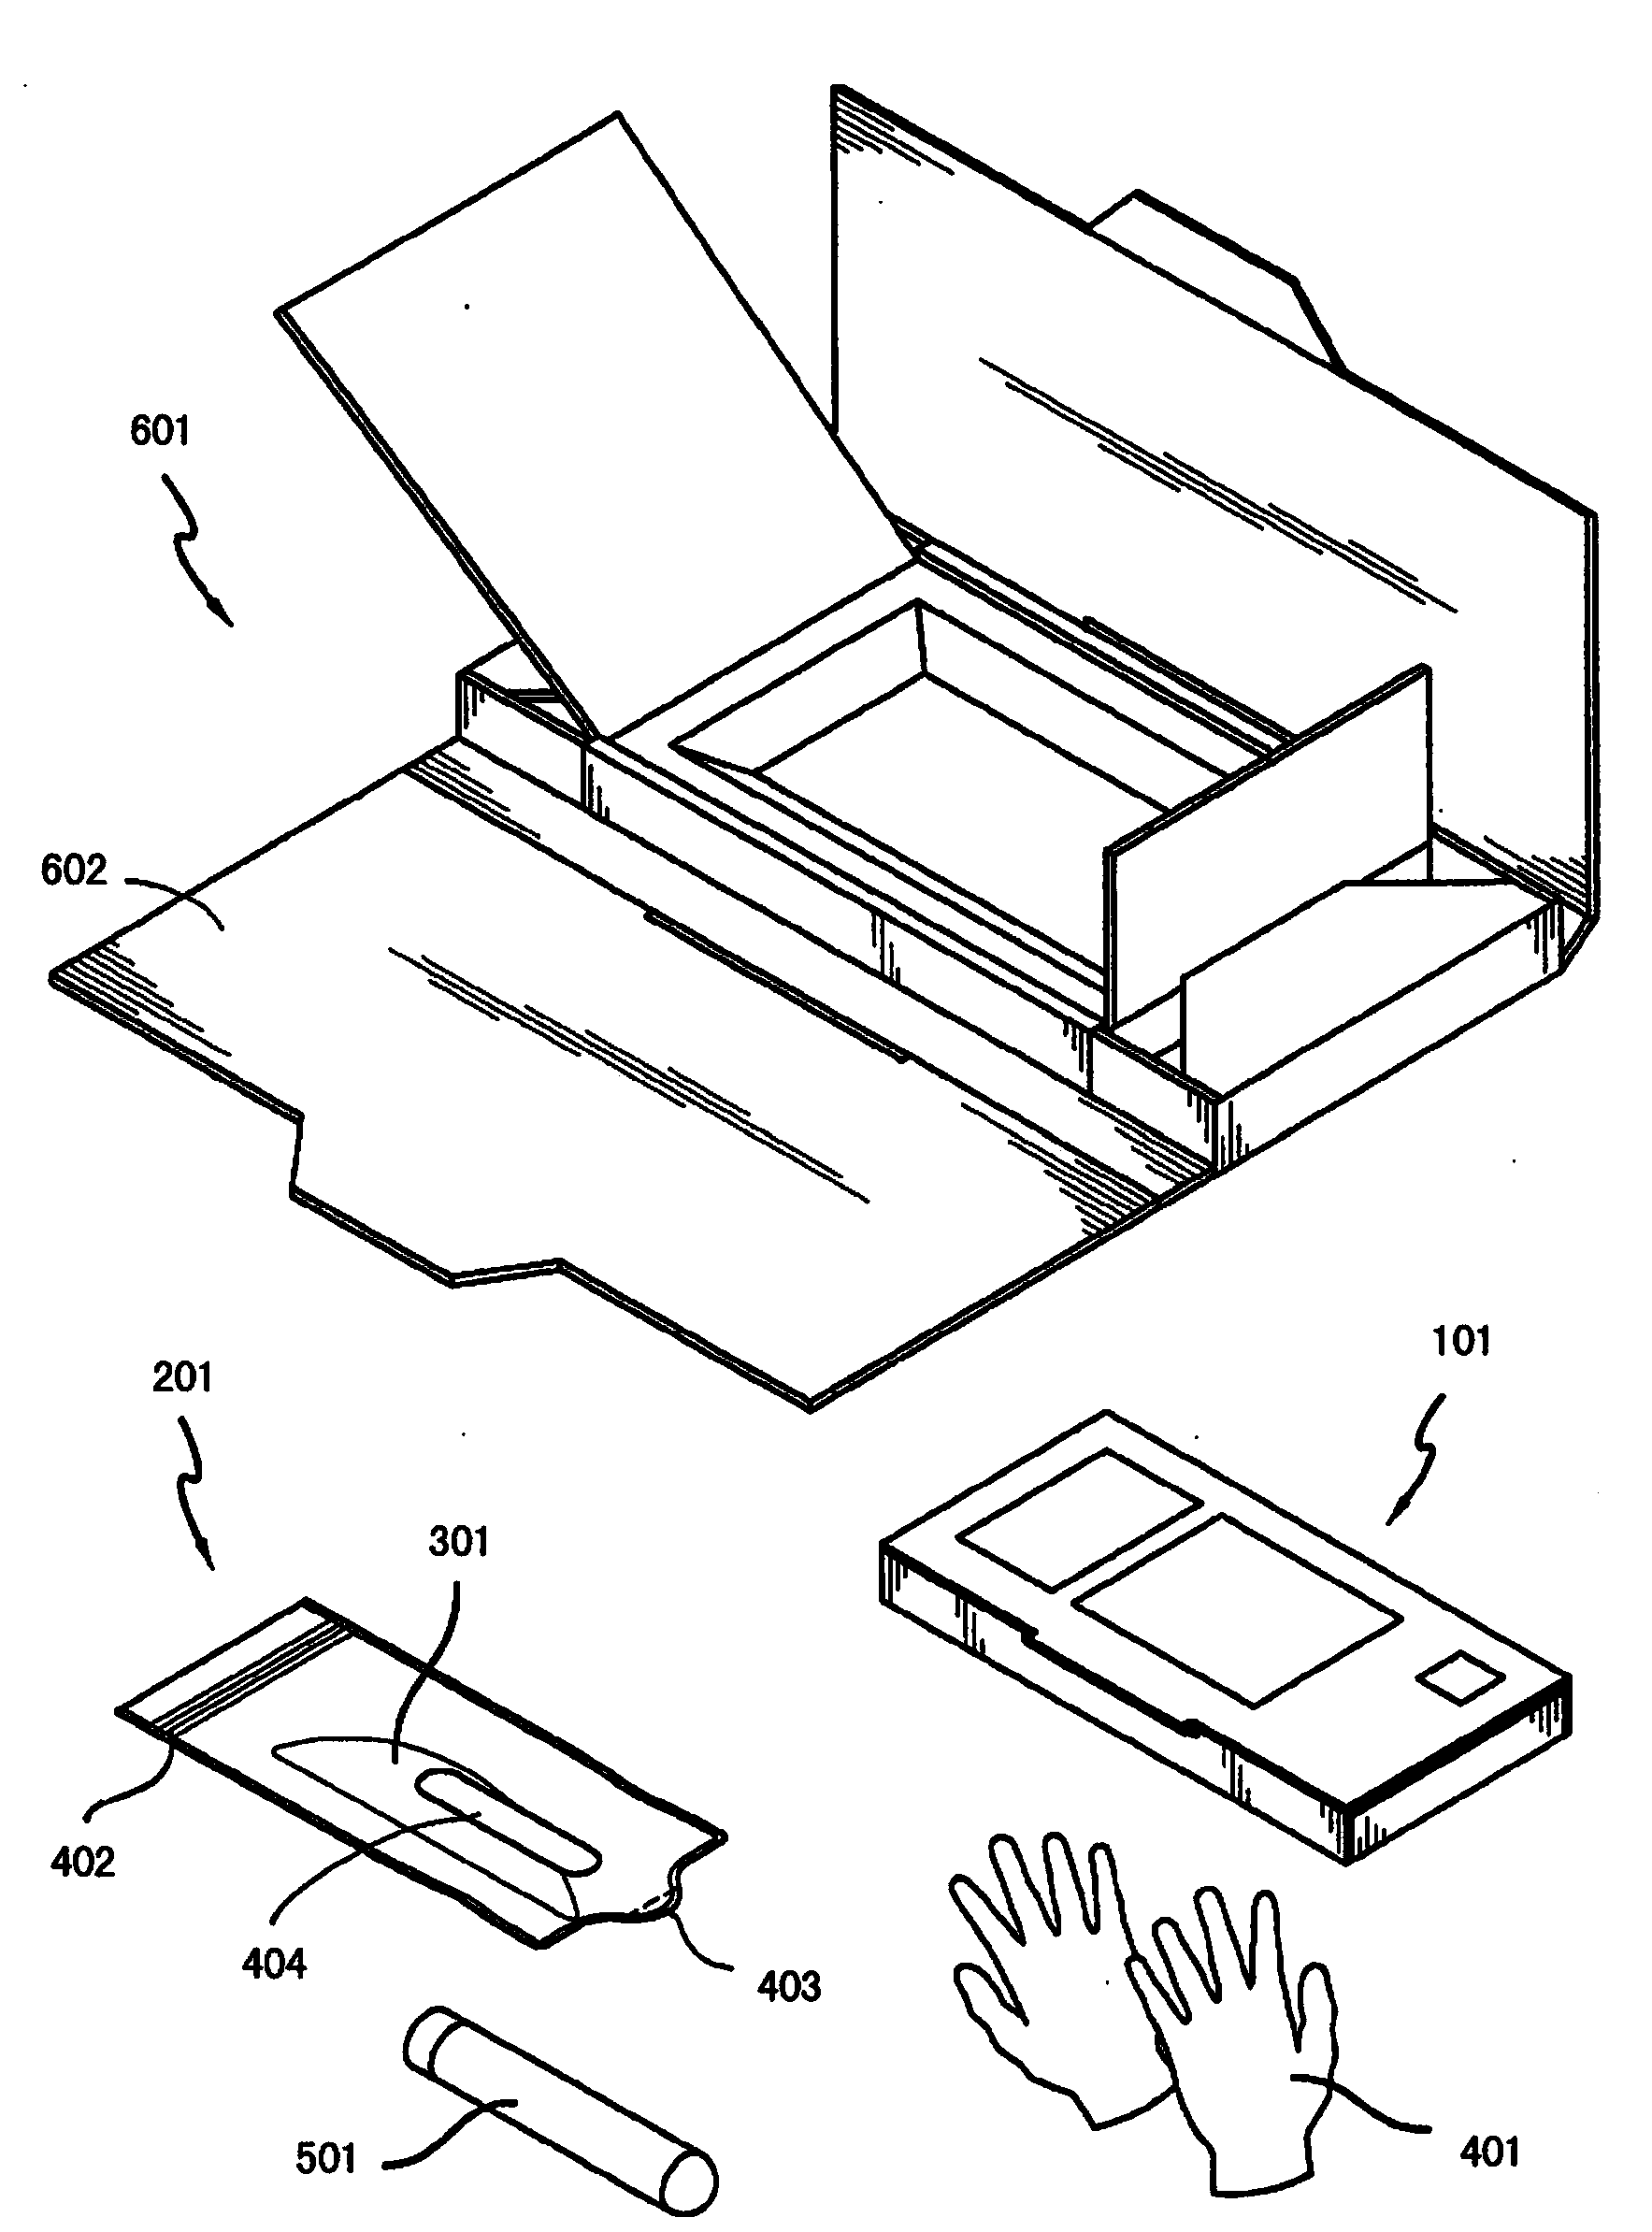 Methods, packaging and apparatus for collection of biological samples